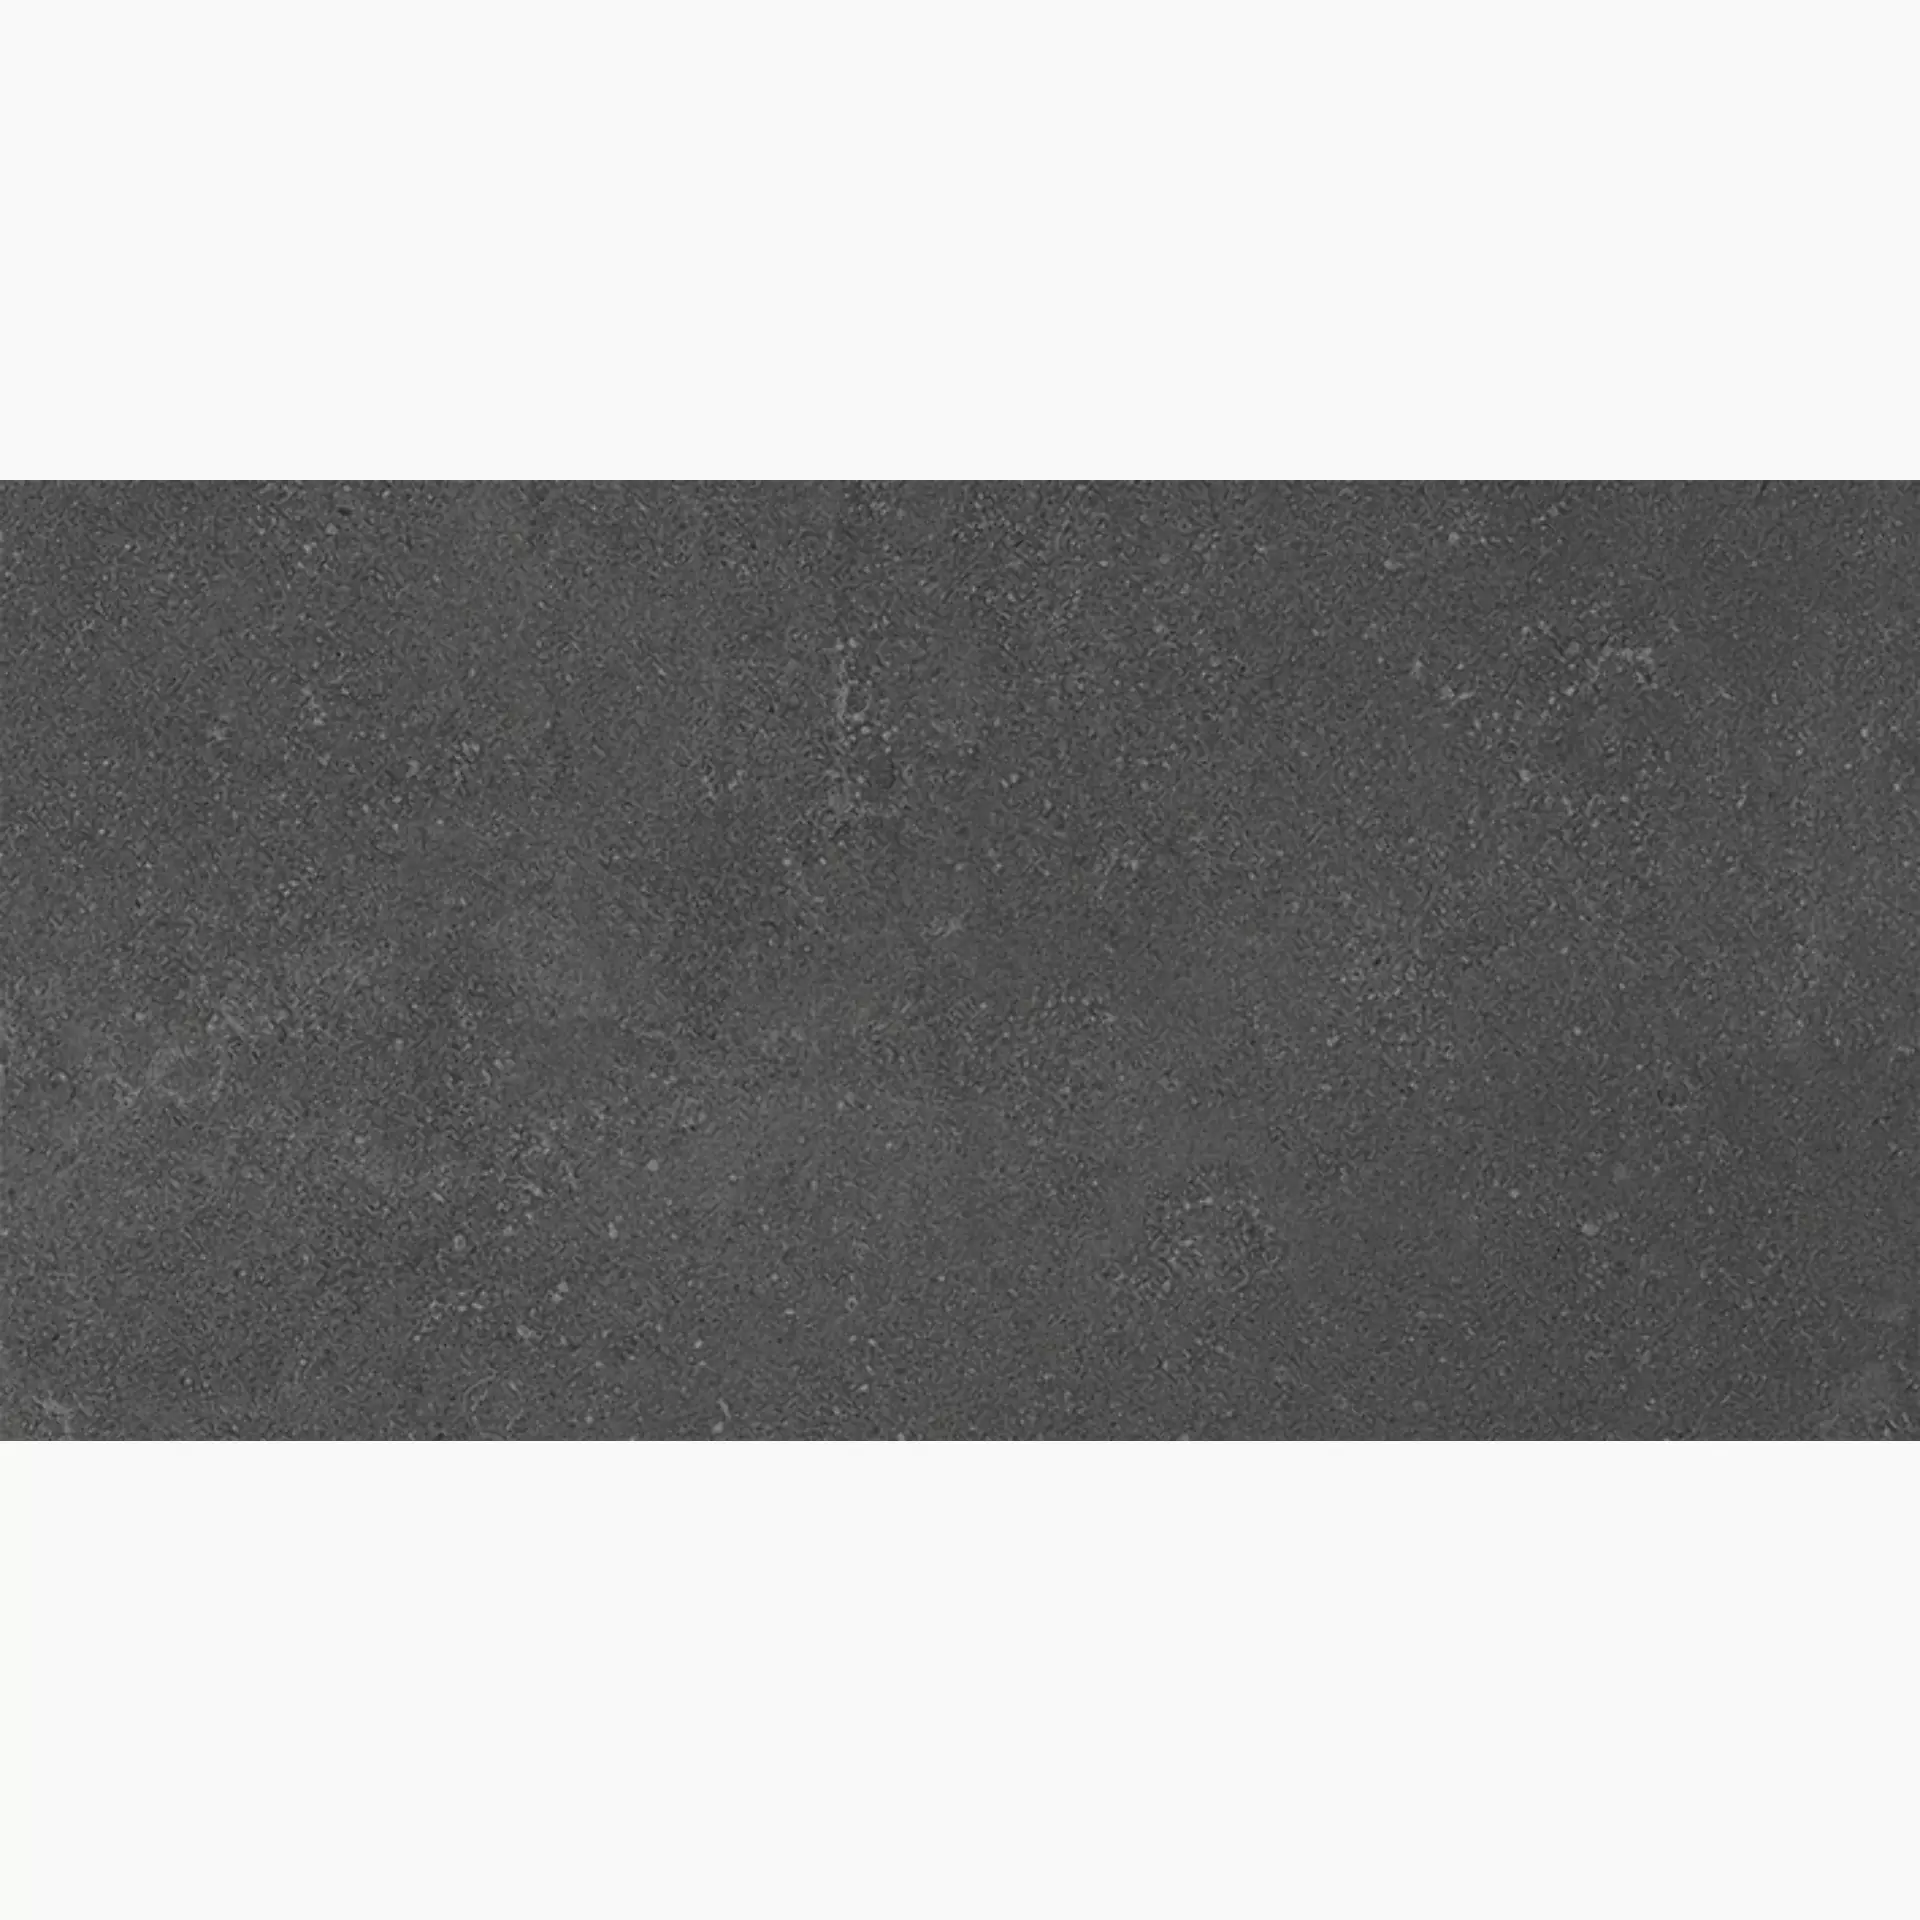 Villeroy & Boch Hudson Magma Rough – Polished 2576-SD8L 30x60cm rectified 10mm